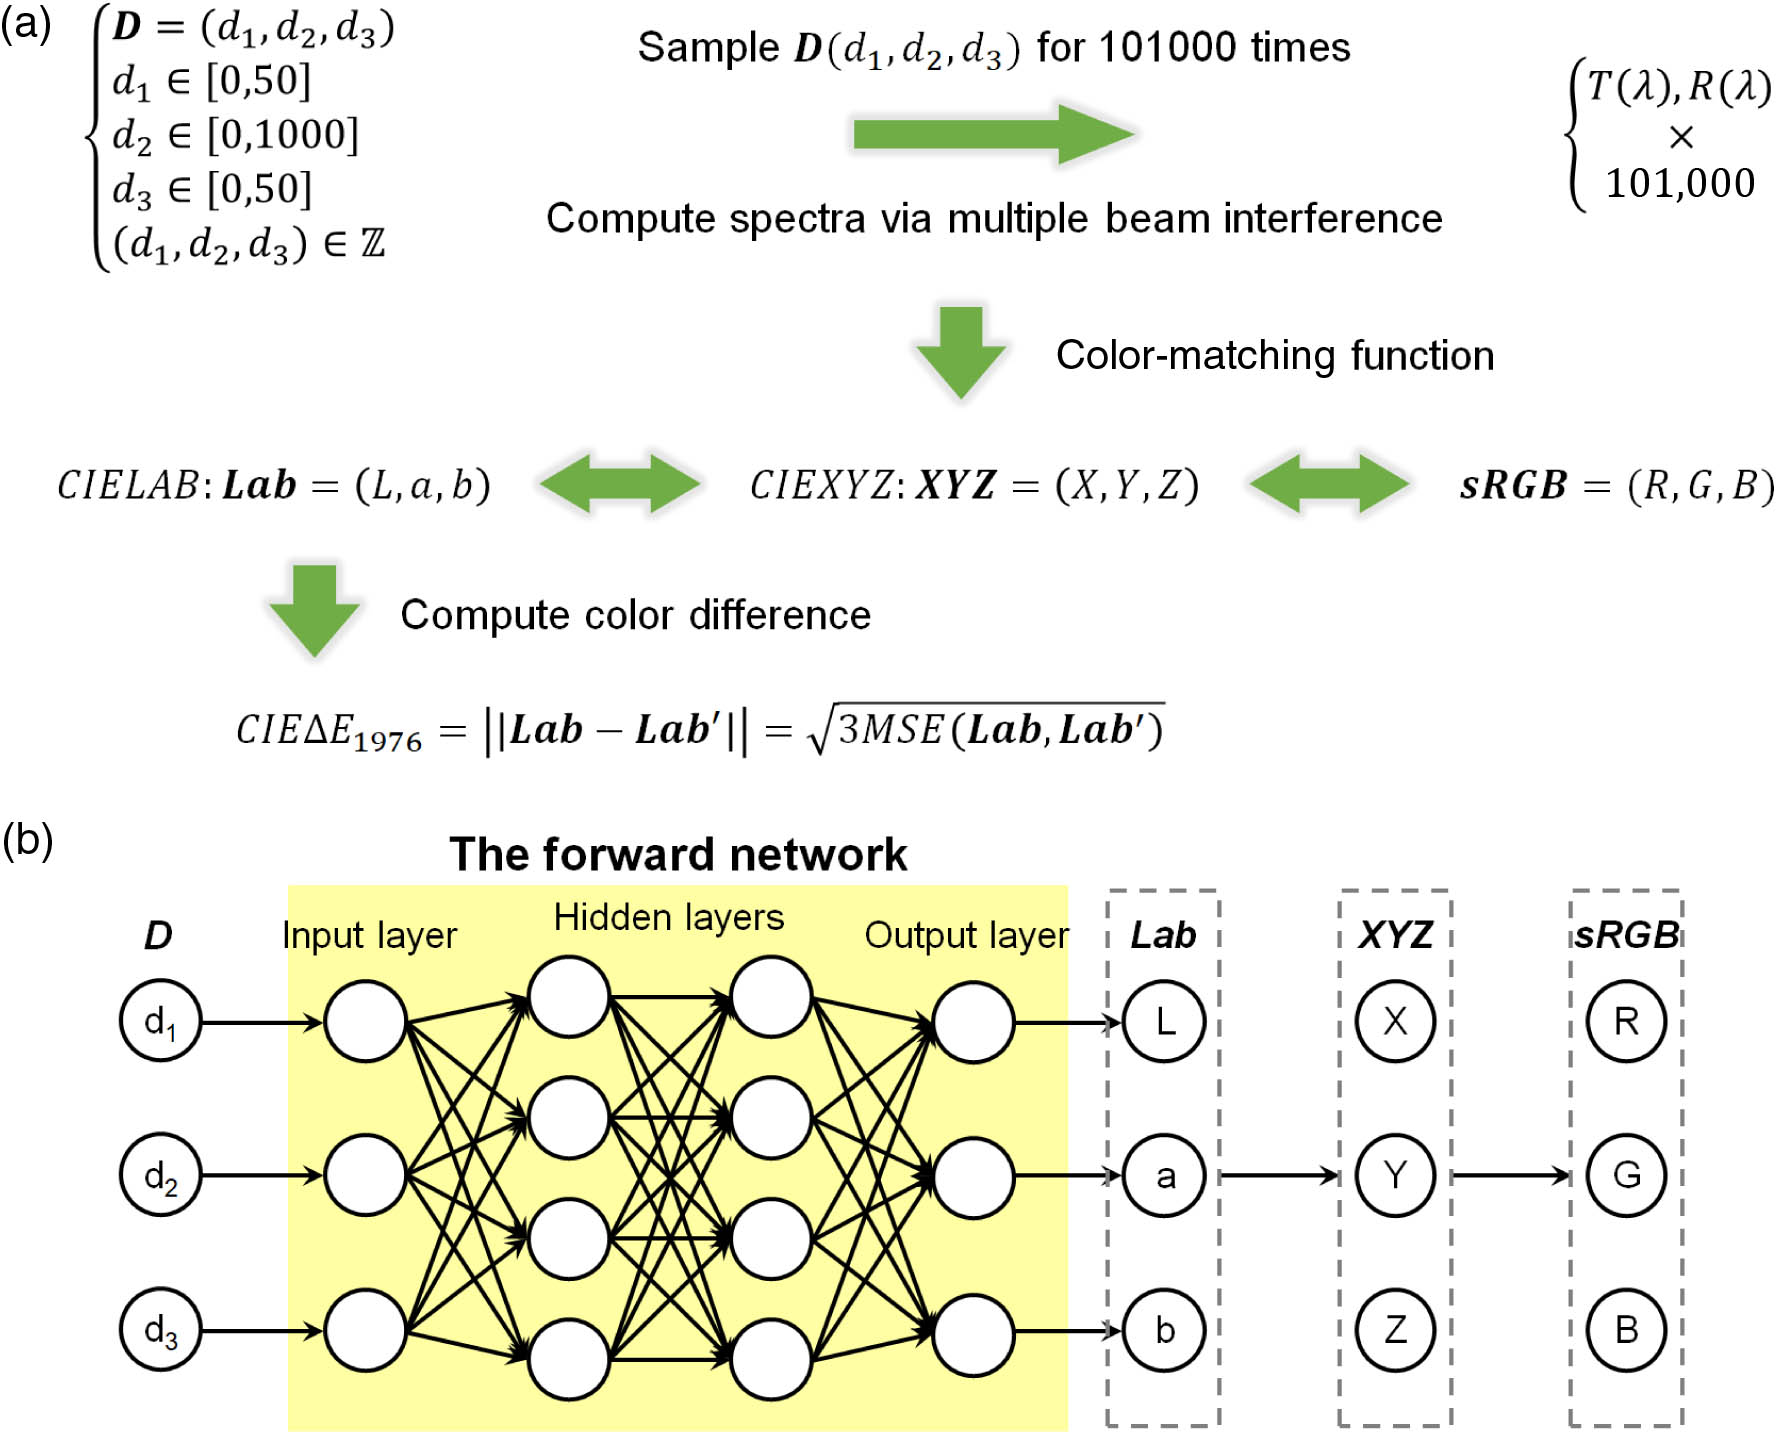 Forward neural network for predicting F-P cavity structural colors. (a) The relationships of different parameters in the dataset. The single arrow means the transformation is unidirectional, the double arrow means the transformation is reversible. (b) The architecture of the forward neural network with input layer of geometric parameter D, hidden layers, and output layers of Lab color values.